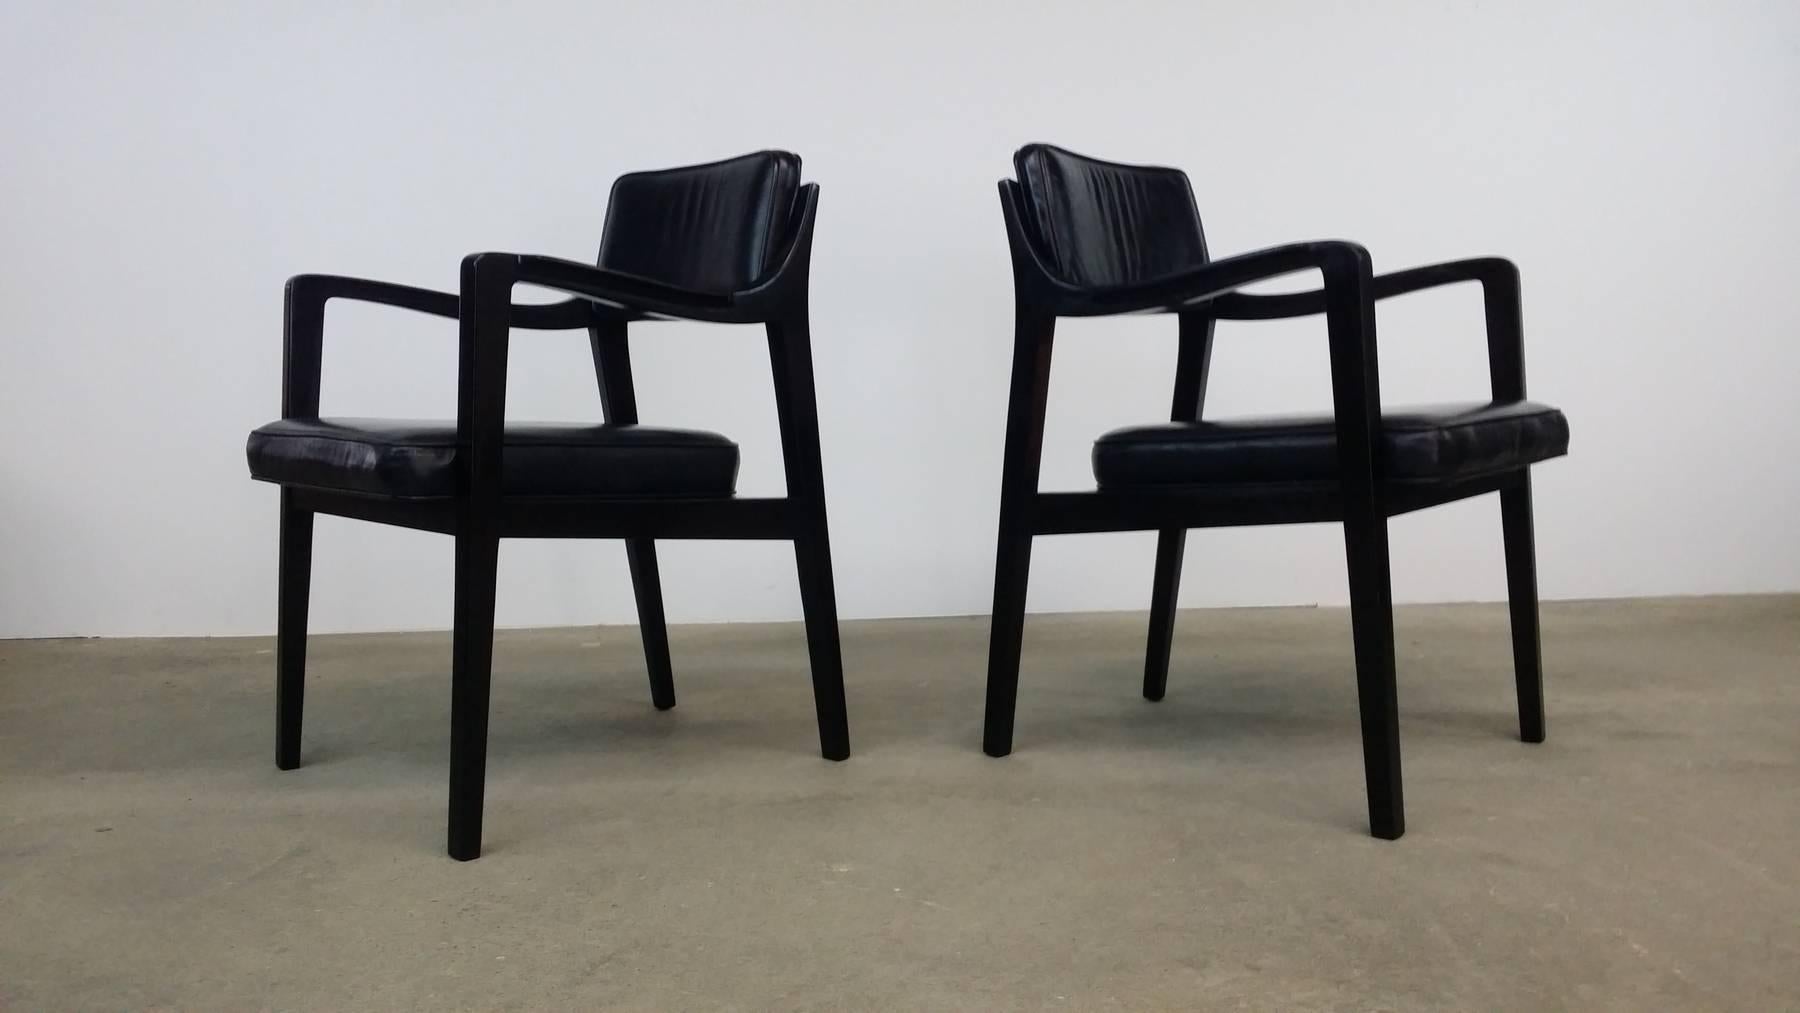 Pair of Dunbar chairs in mahogany and black leather, designed by Edward Wormley, circa 1966. Professionally refinished in a very dark, almost ebony finish. Original black leather in excellent condition.